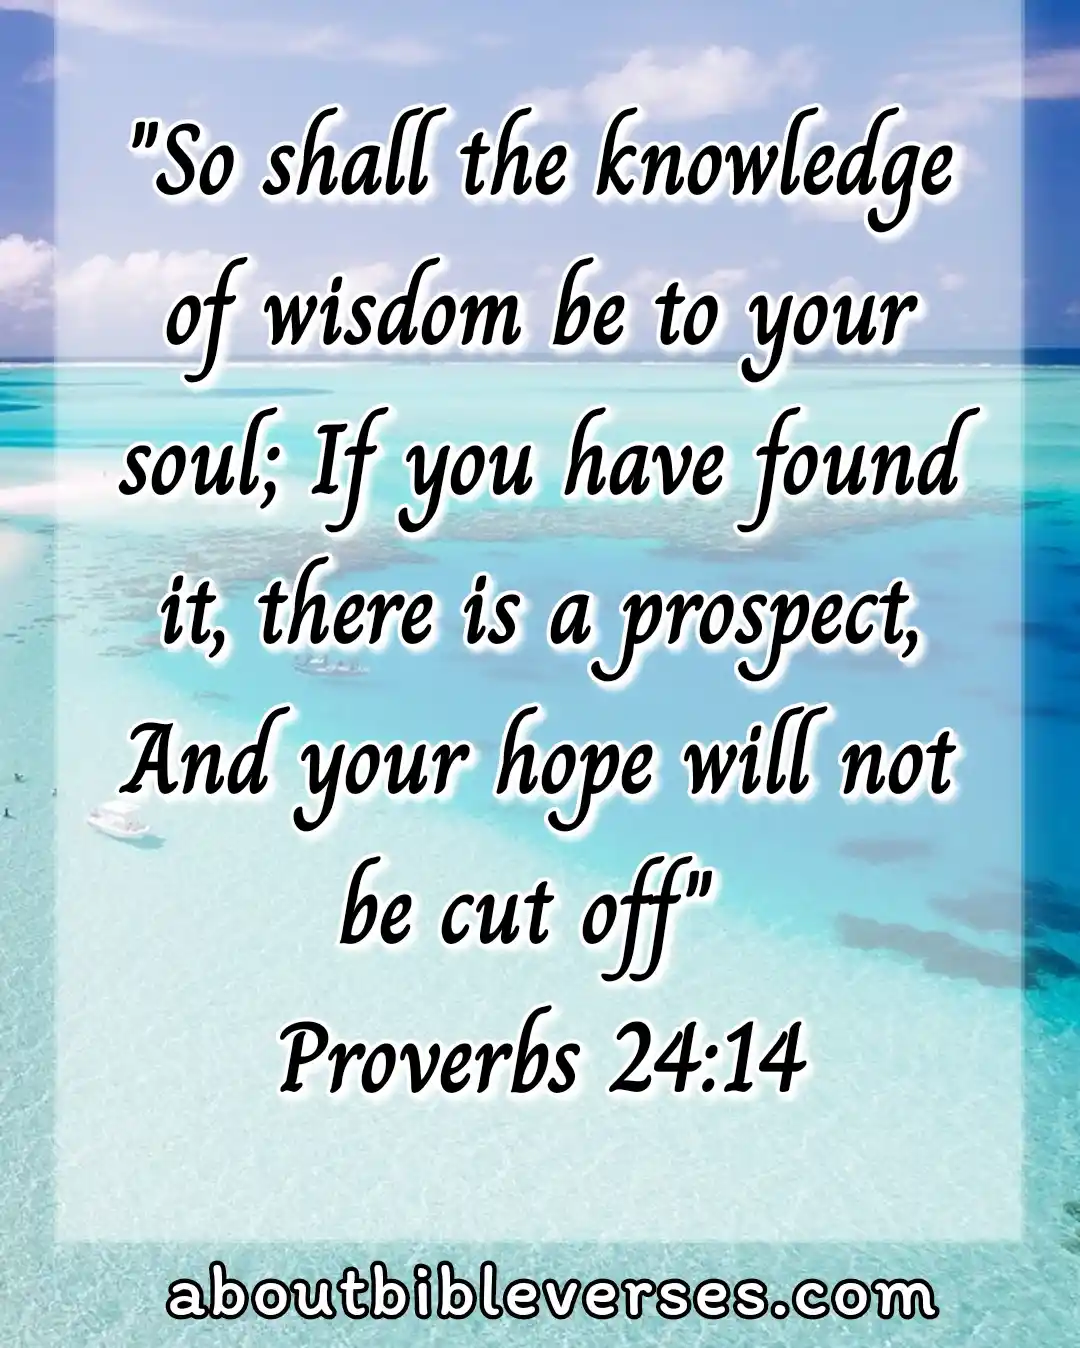 Bible verse about hope for the future (Proverbs 24:14)